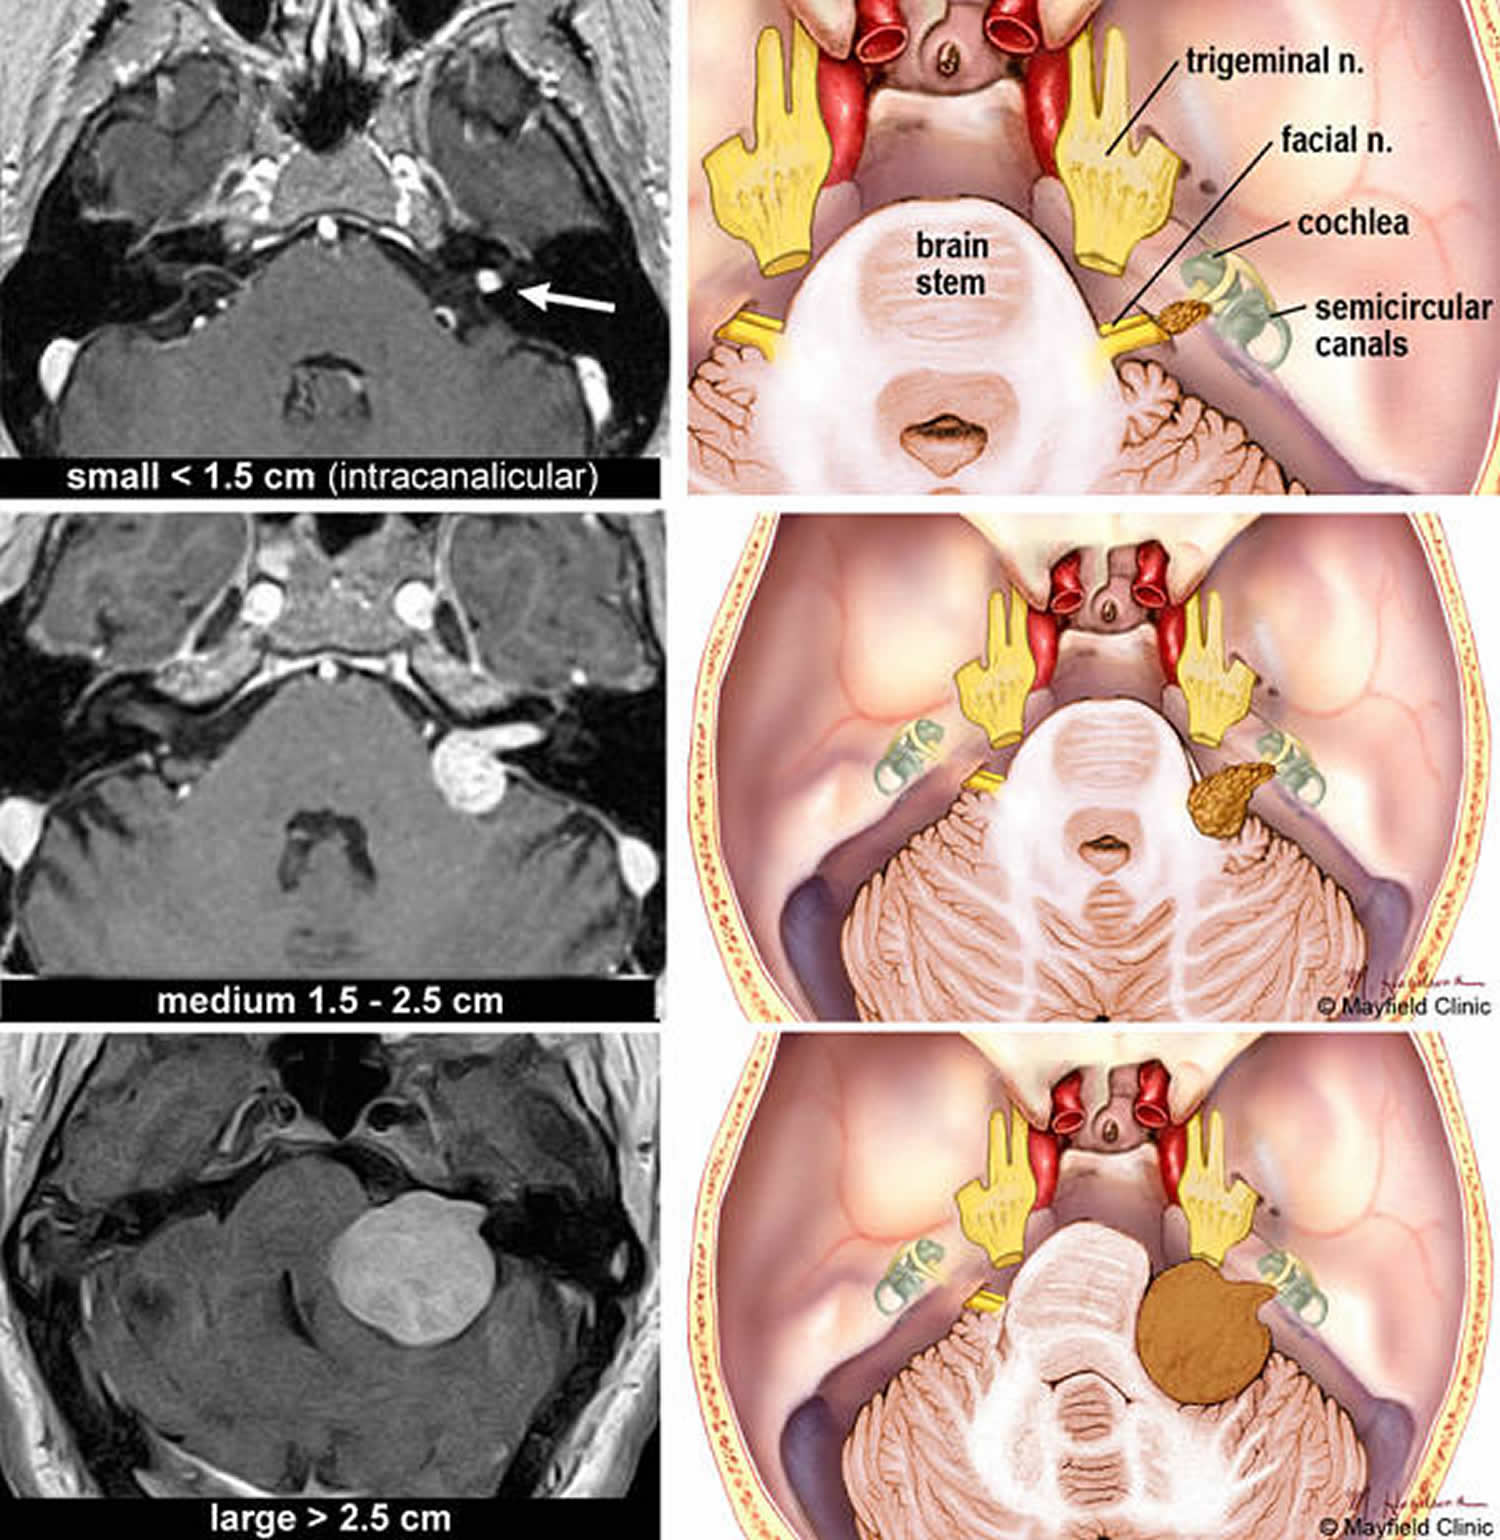 Entirely intracanalicular (top) Intracranial extension without brainstem distortion (middle) Intracranial extension with brainstem distortion (bottom)